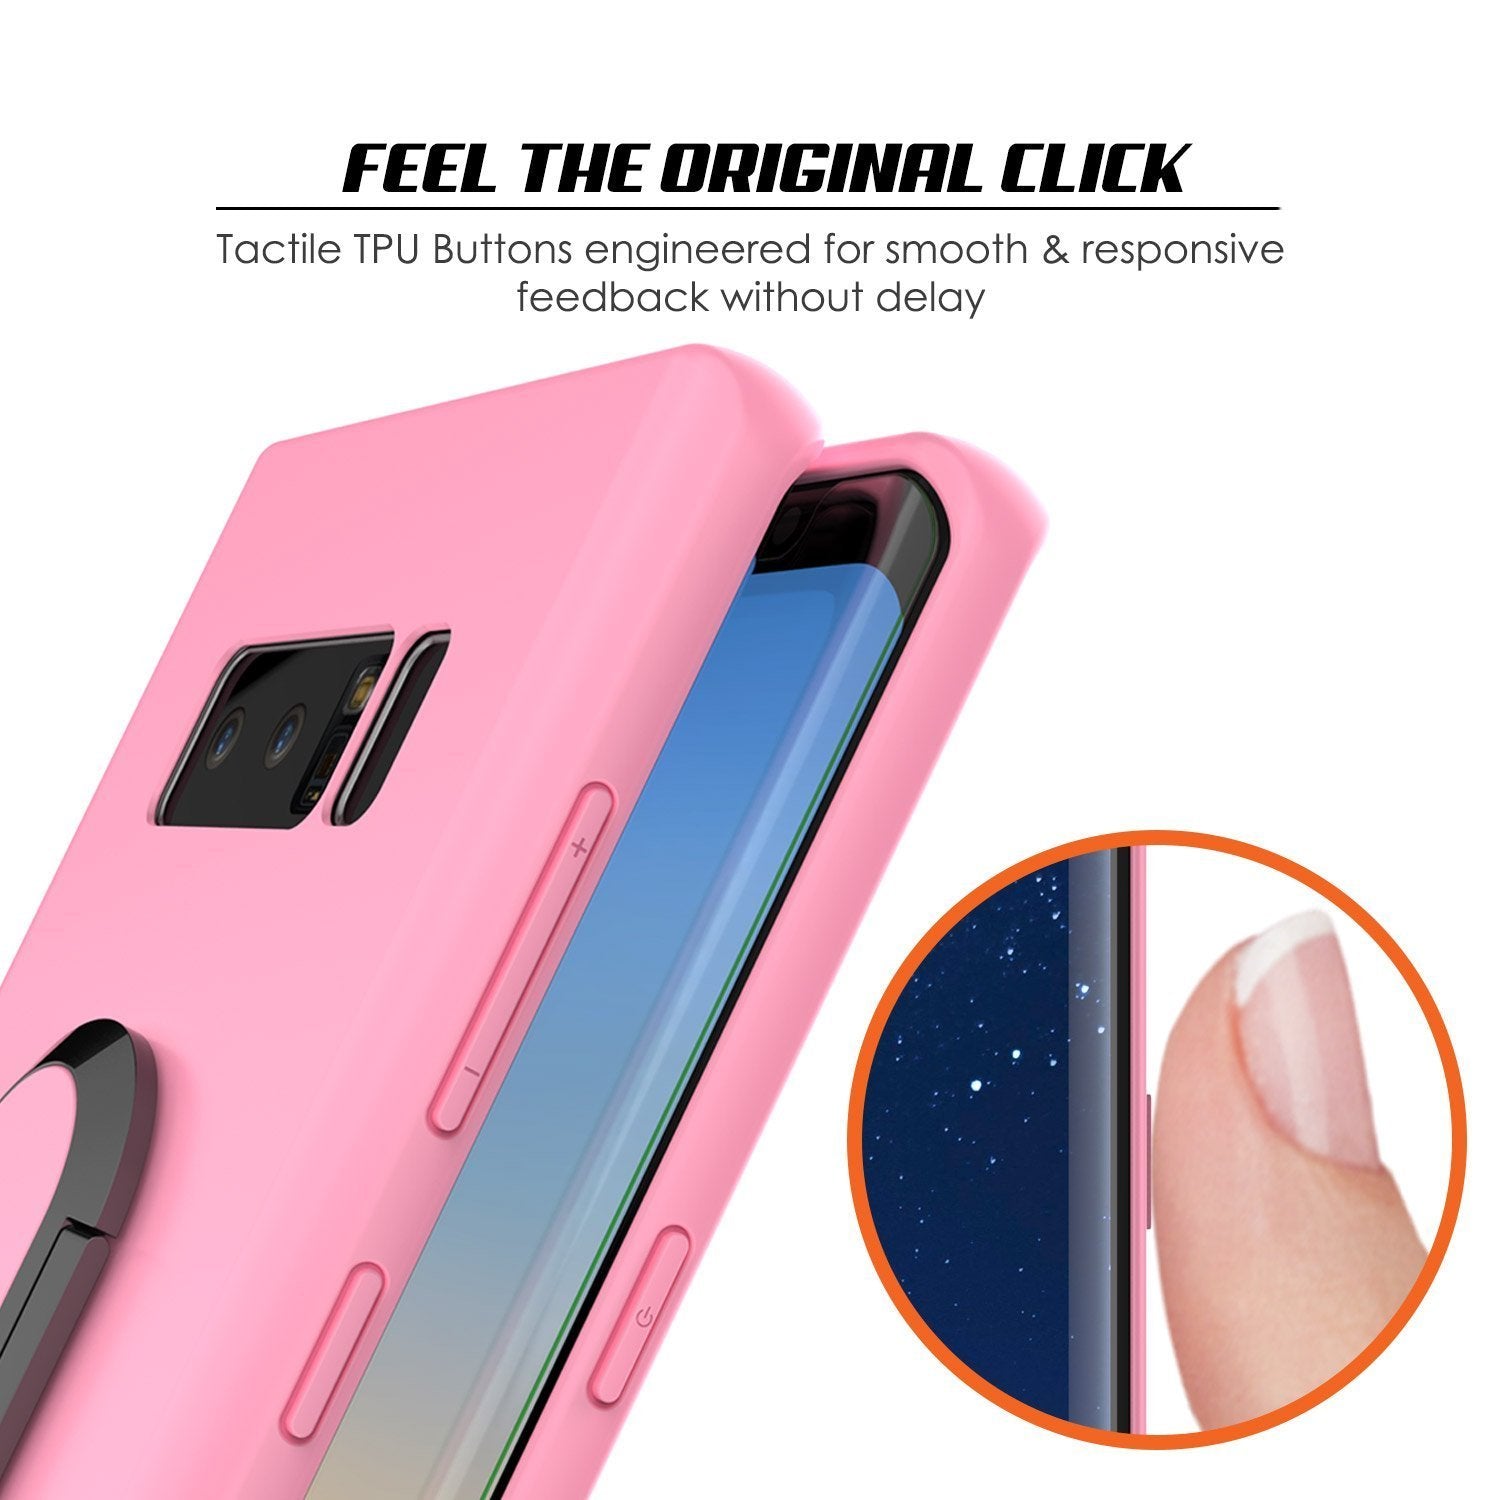 Galaxy Note 8 Case, Punkcase Magnetix Protective TPU Cover W/ Kickstand, Screen Protector [Pink] - PunkCase NZ